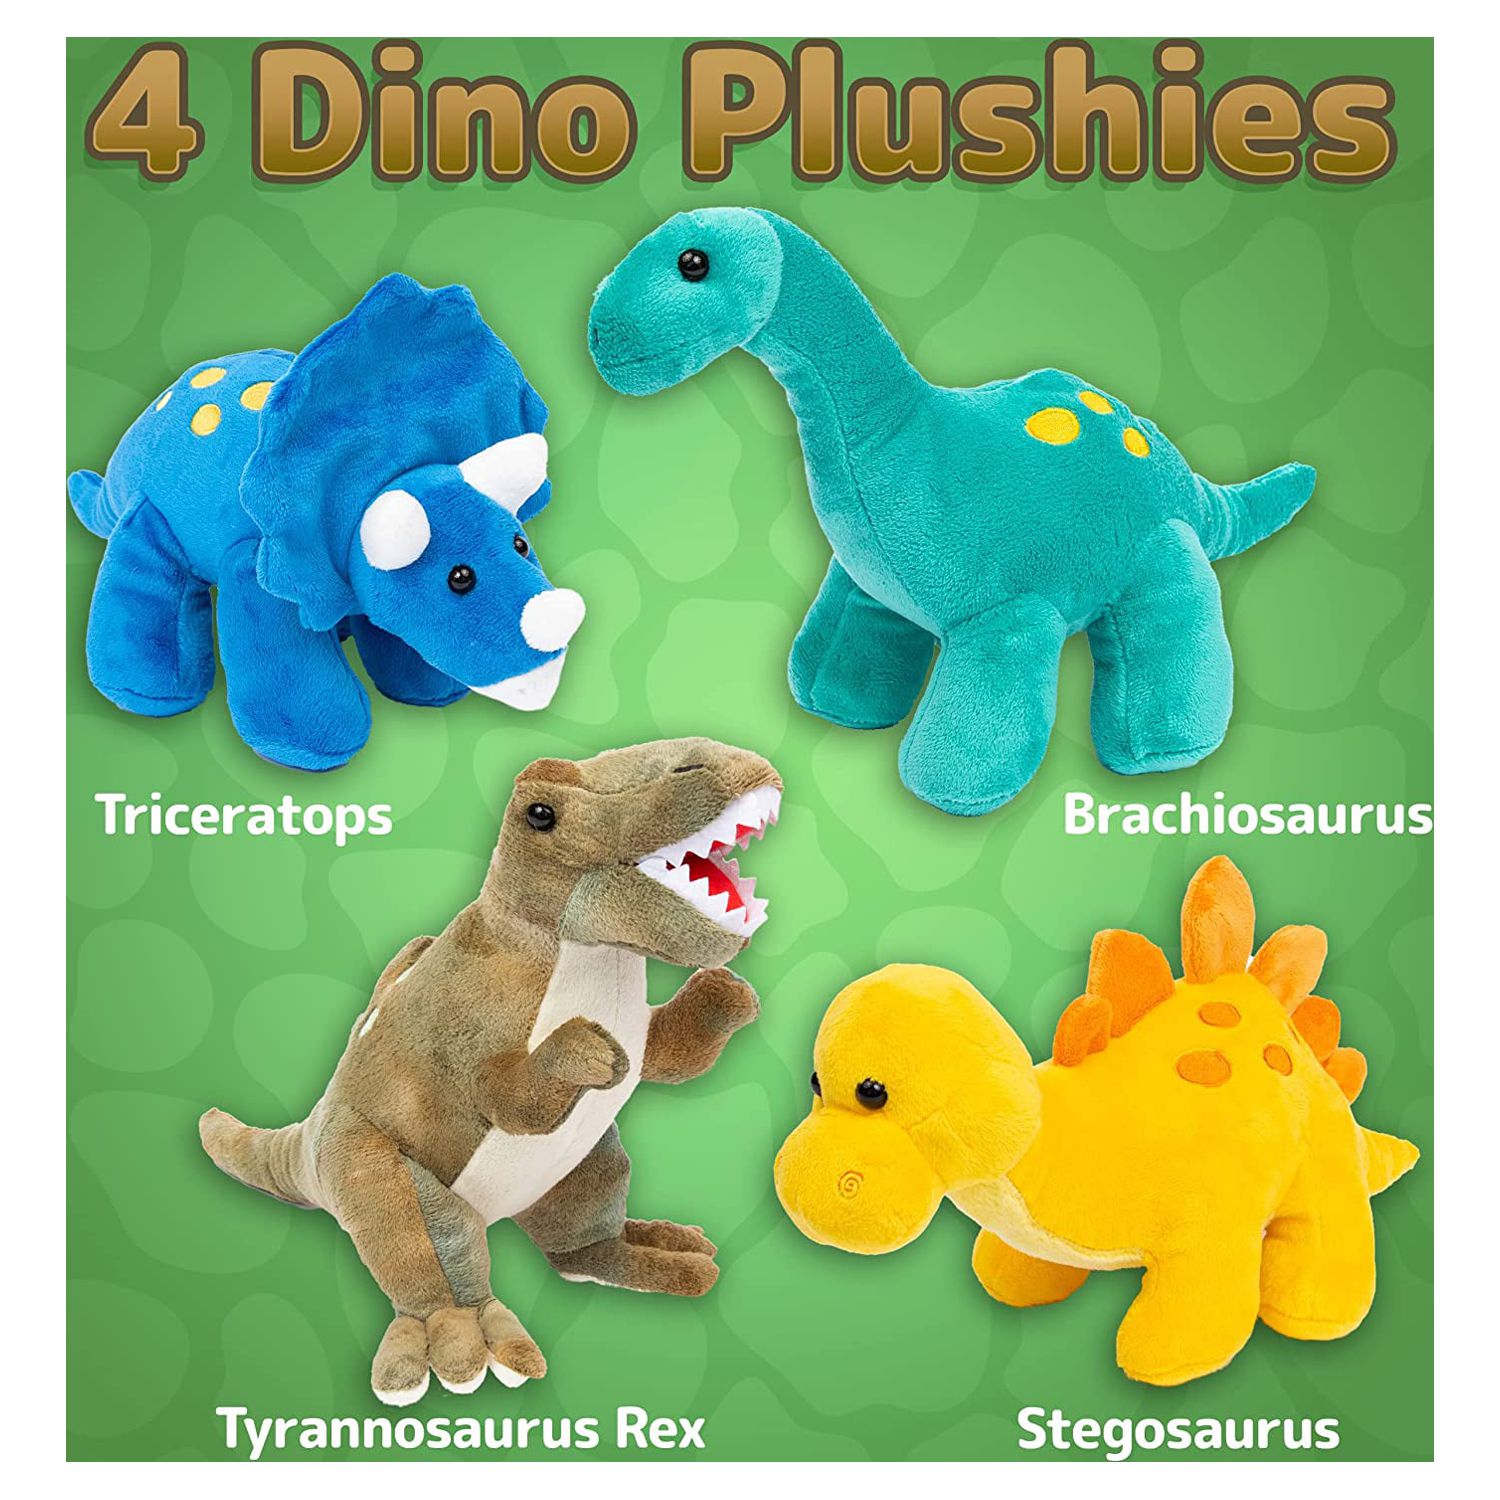 Prextex Plush Dinosaurs - 4 Pack of 10'' Long Stuffed Animal Assortment - Great Gift for Kids - Great Christmas Gift Set - image 2 of 7